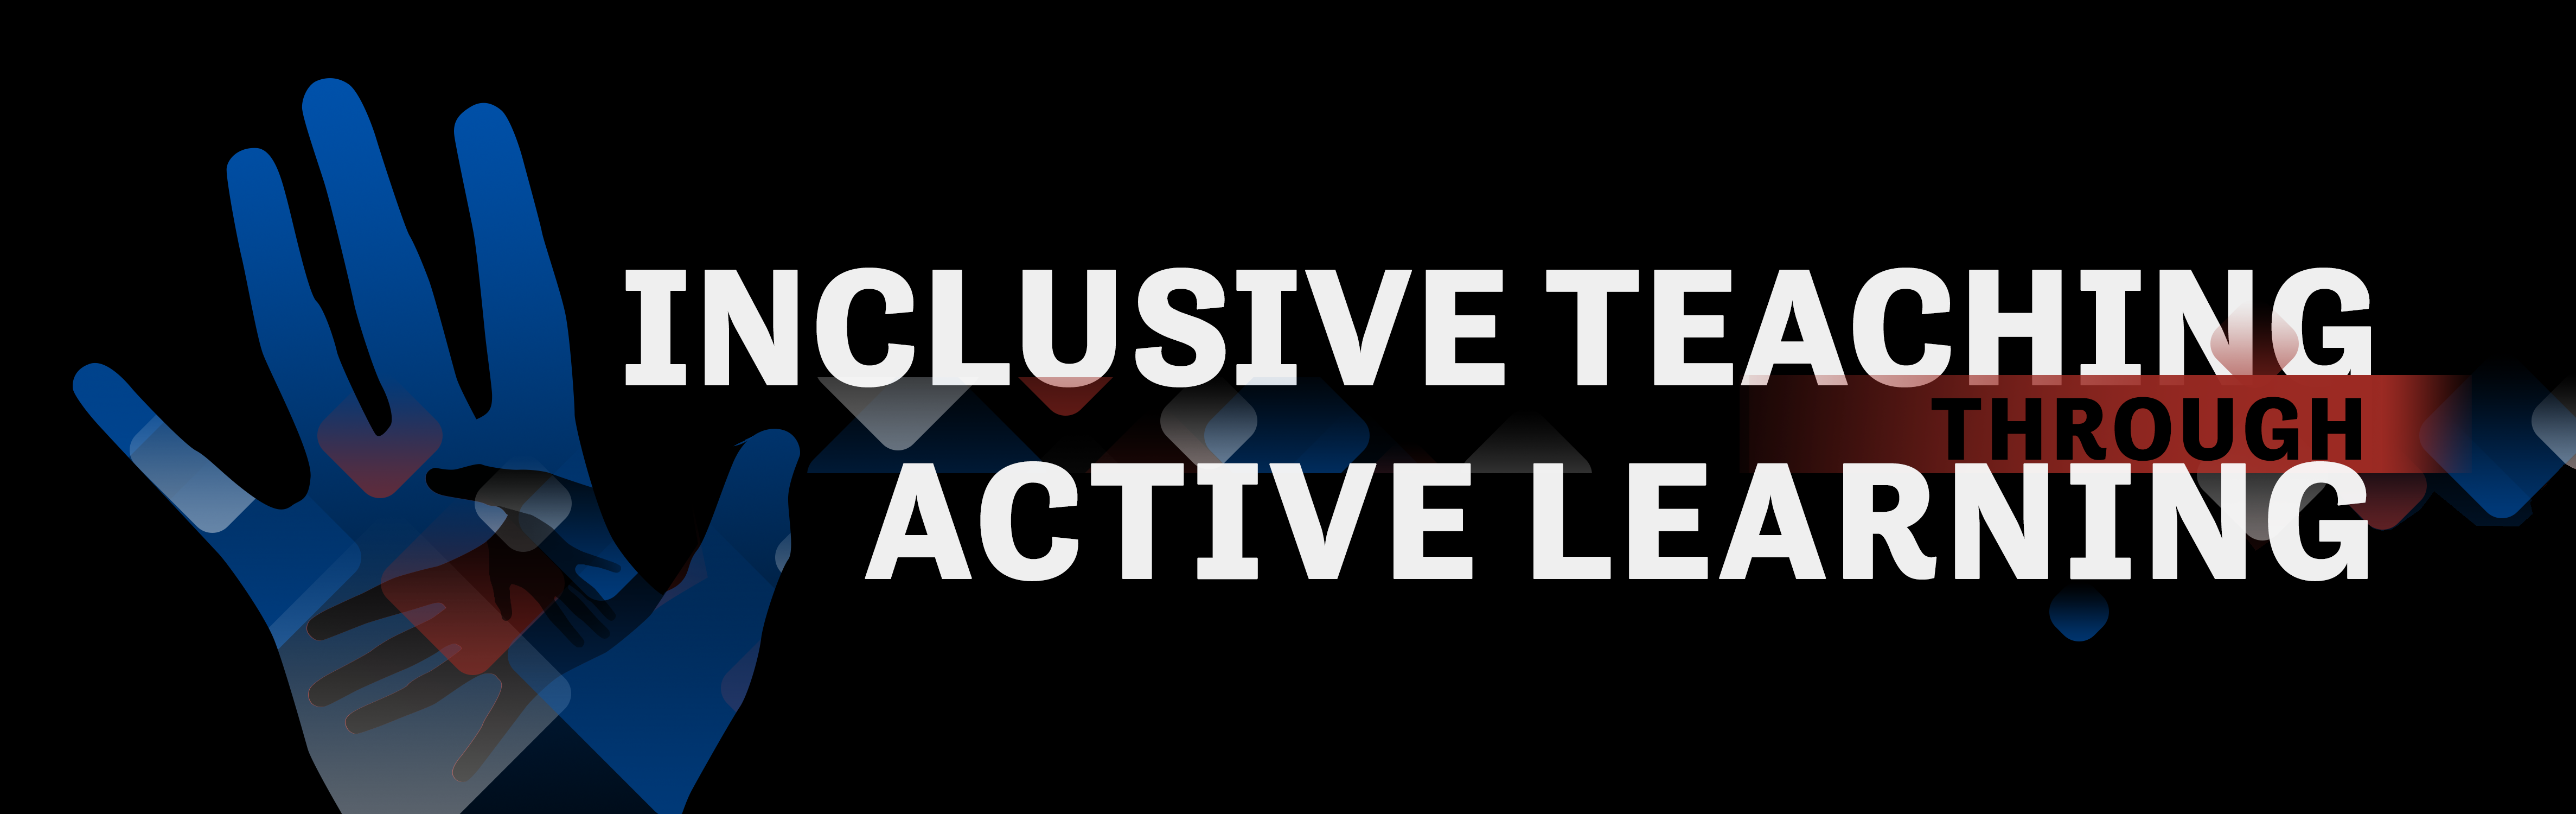 Inclusive Teaching through Active Learning